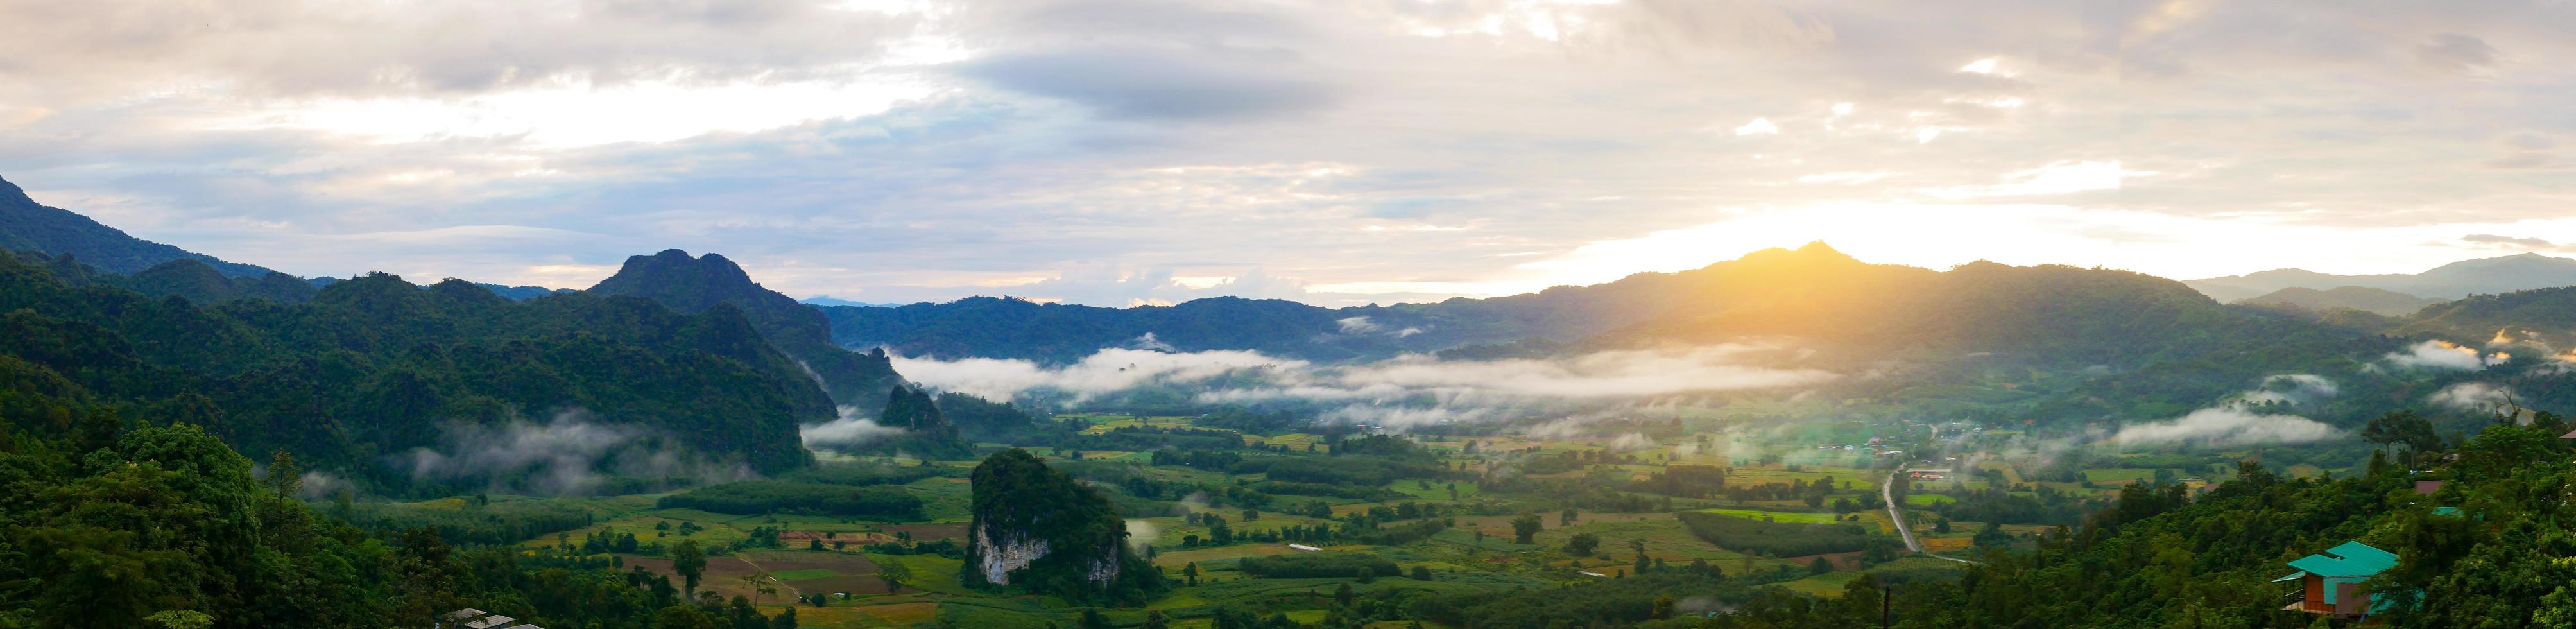 andscape morning mountains and fog, Phu Langka, Thailand photo